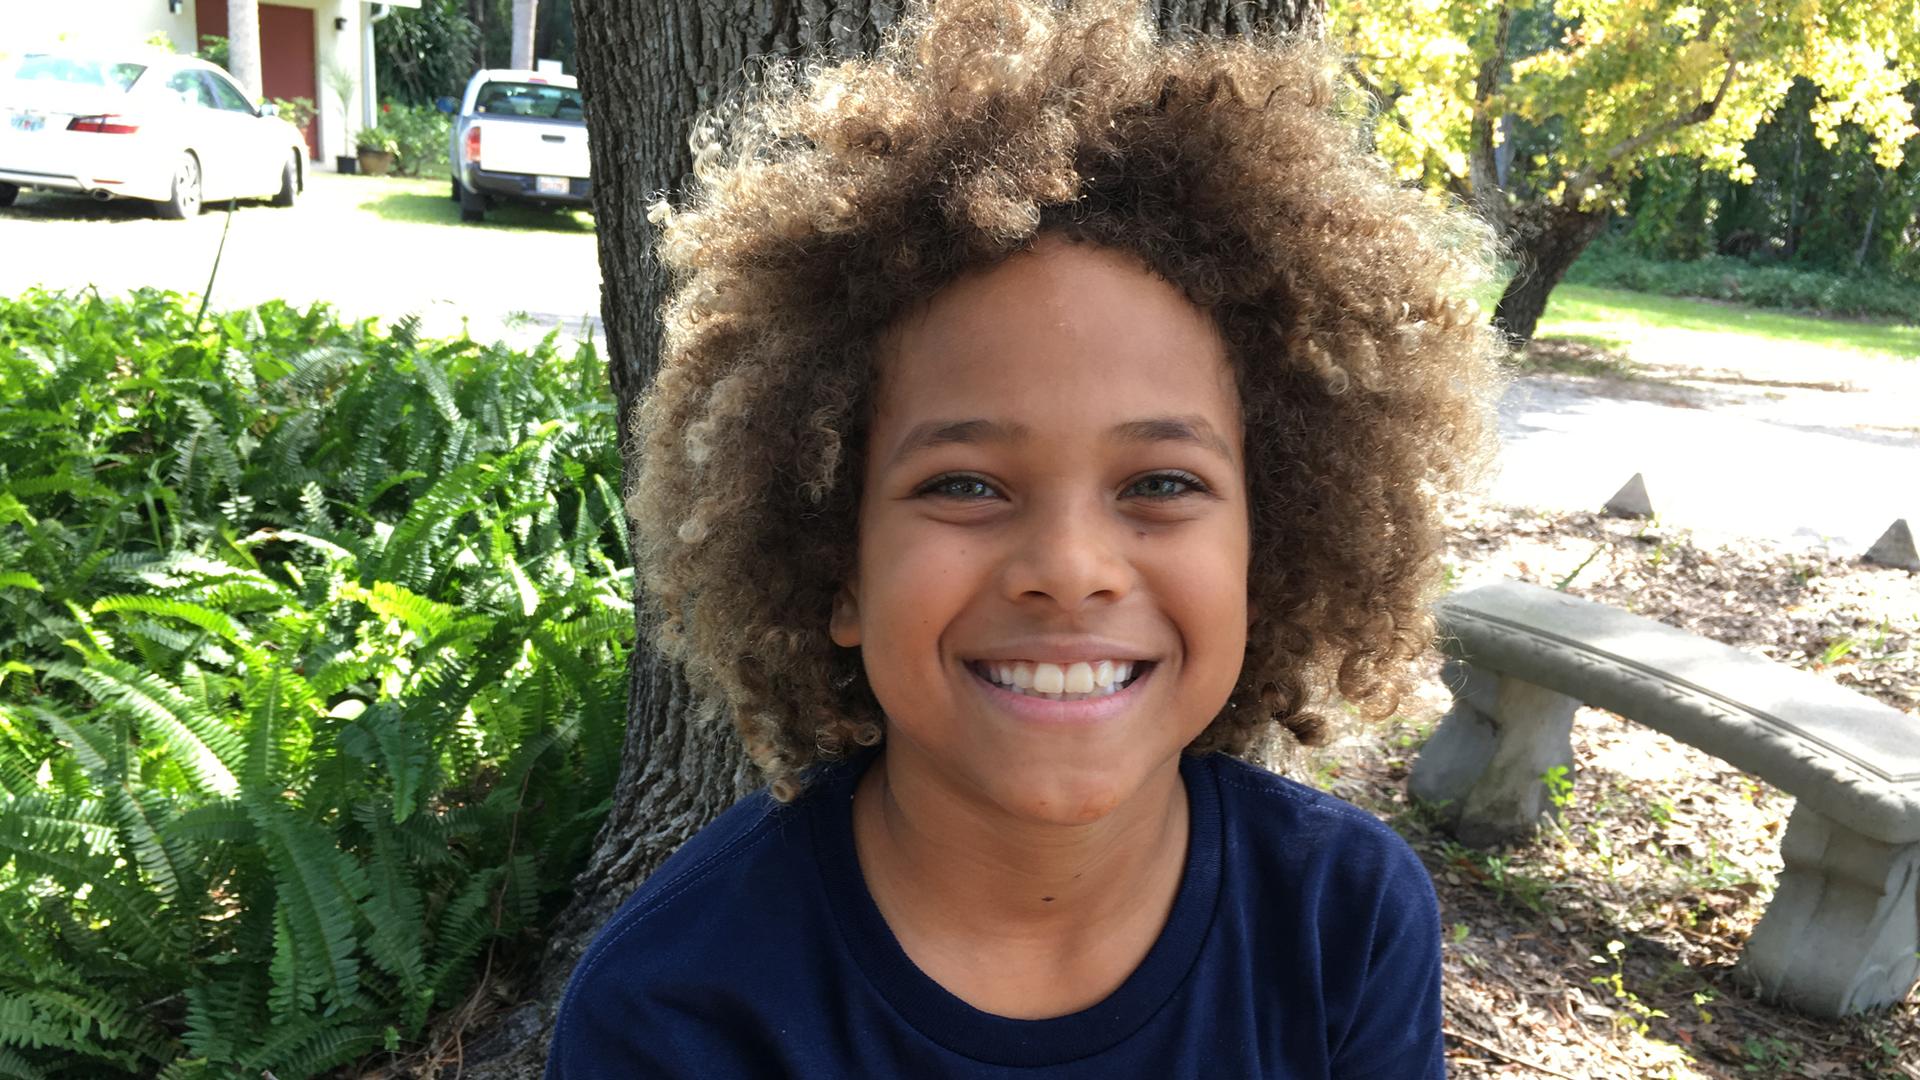 A portrait of 10-year-old Levi Draheim with brown-blonde curly hair.